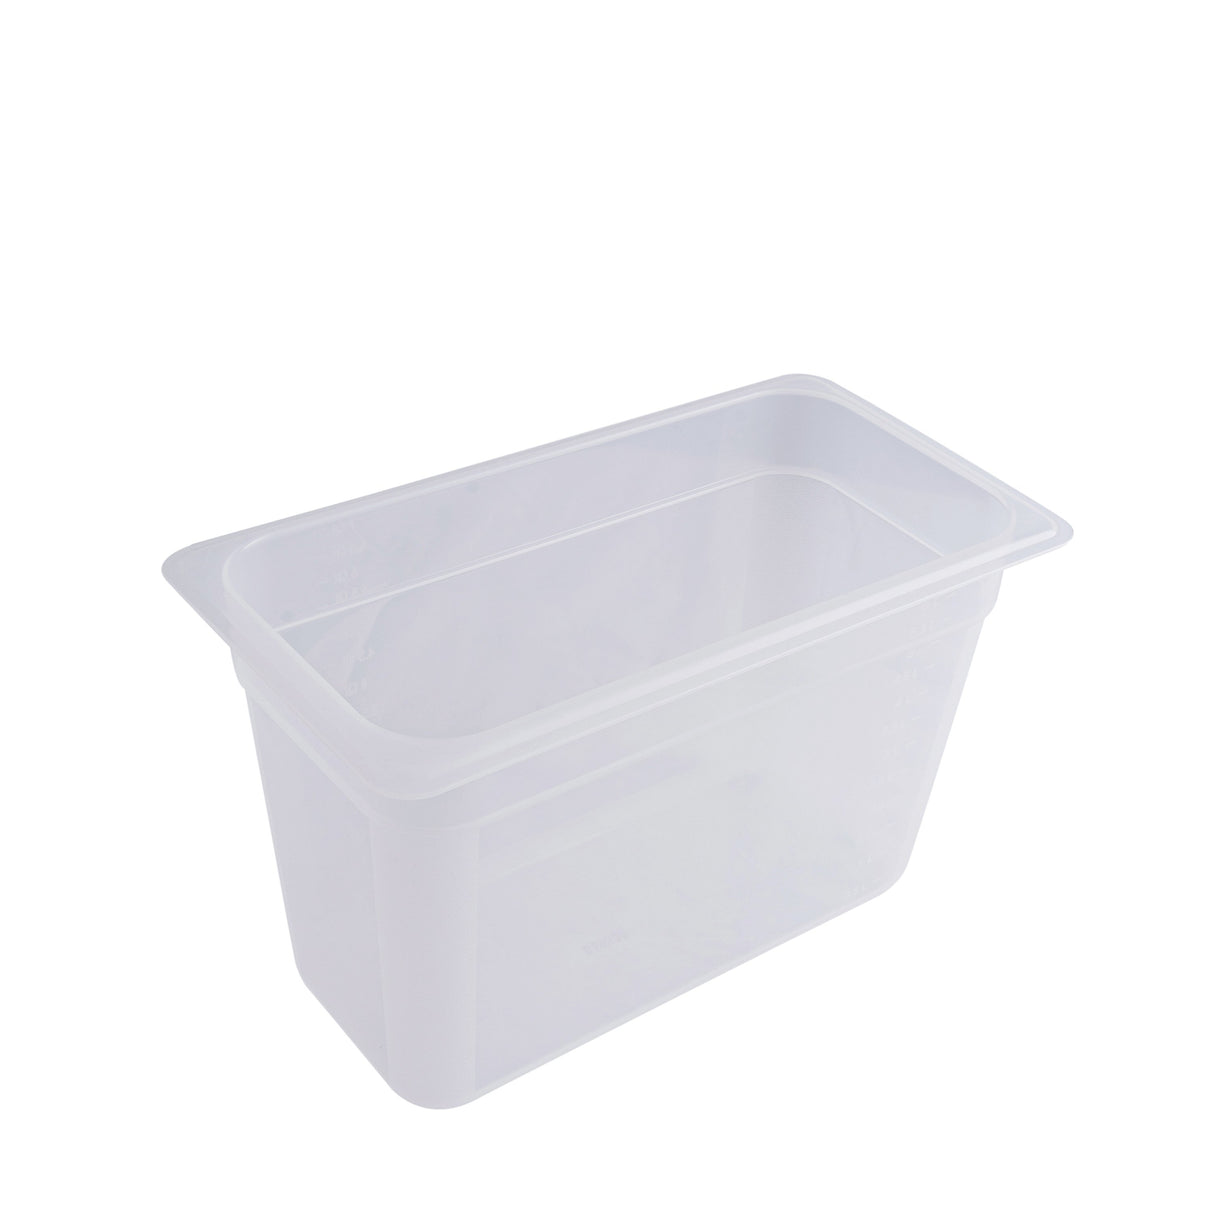 Food Pan - Pp, 1/3 Size, 200Mm from Gastroplast. Sold in boxes of 1. Hospitality quality at wholesale price with The Flying Fork! 